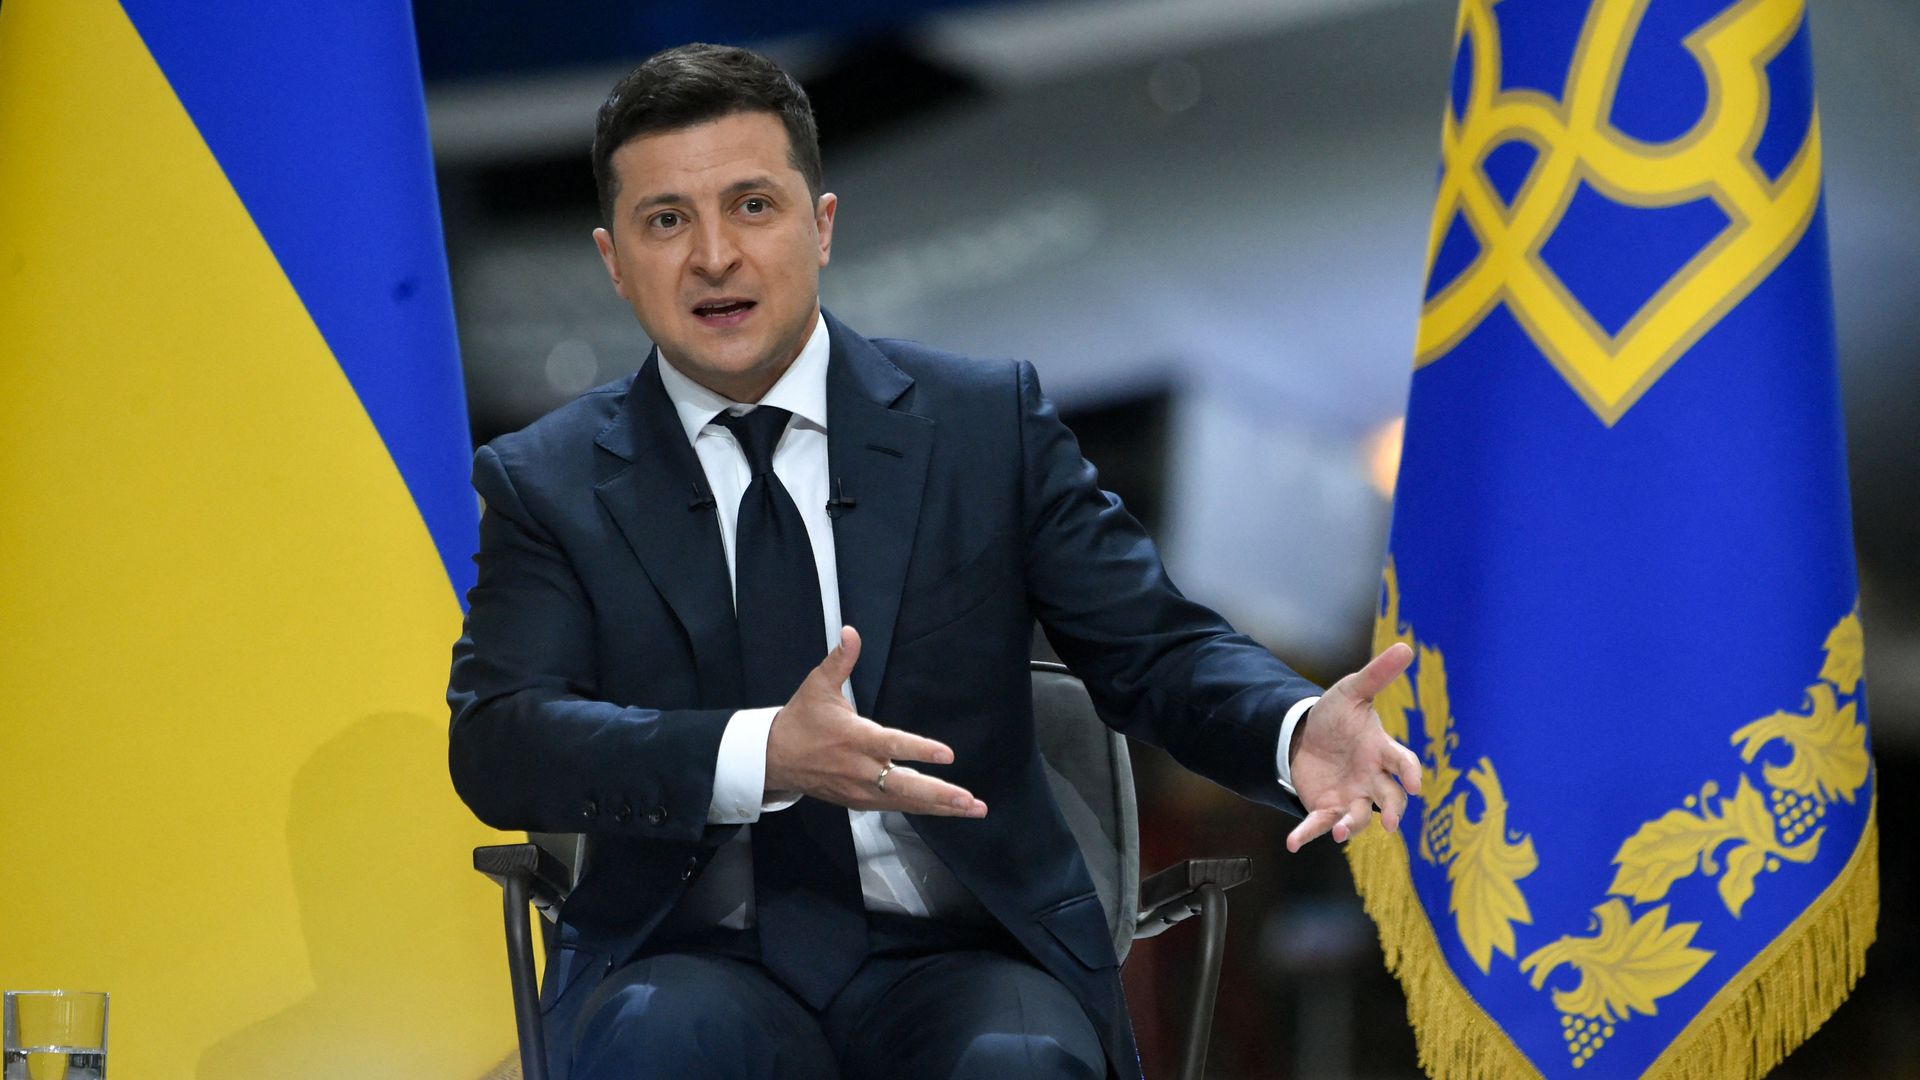 Zelensky Disappointed With Biden, Hopes It's All Washington's "Master Plan"